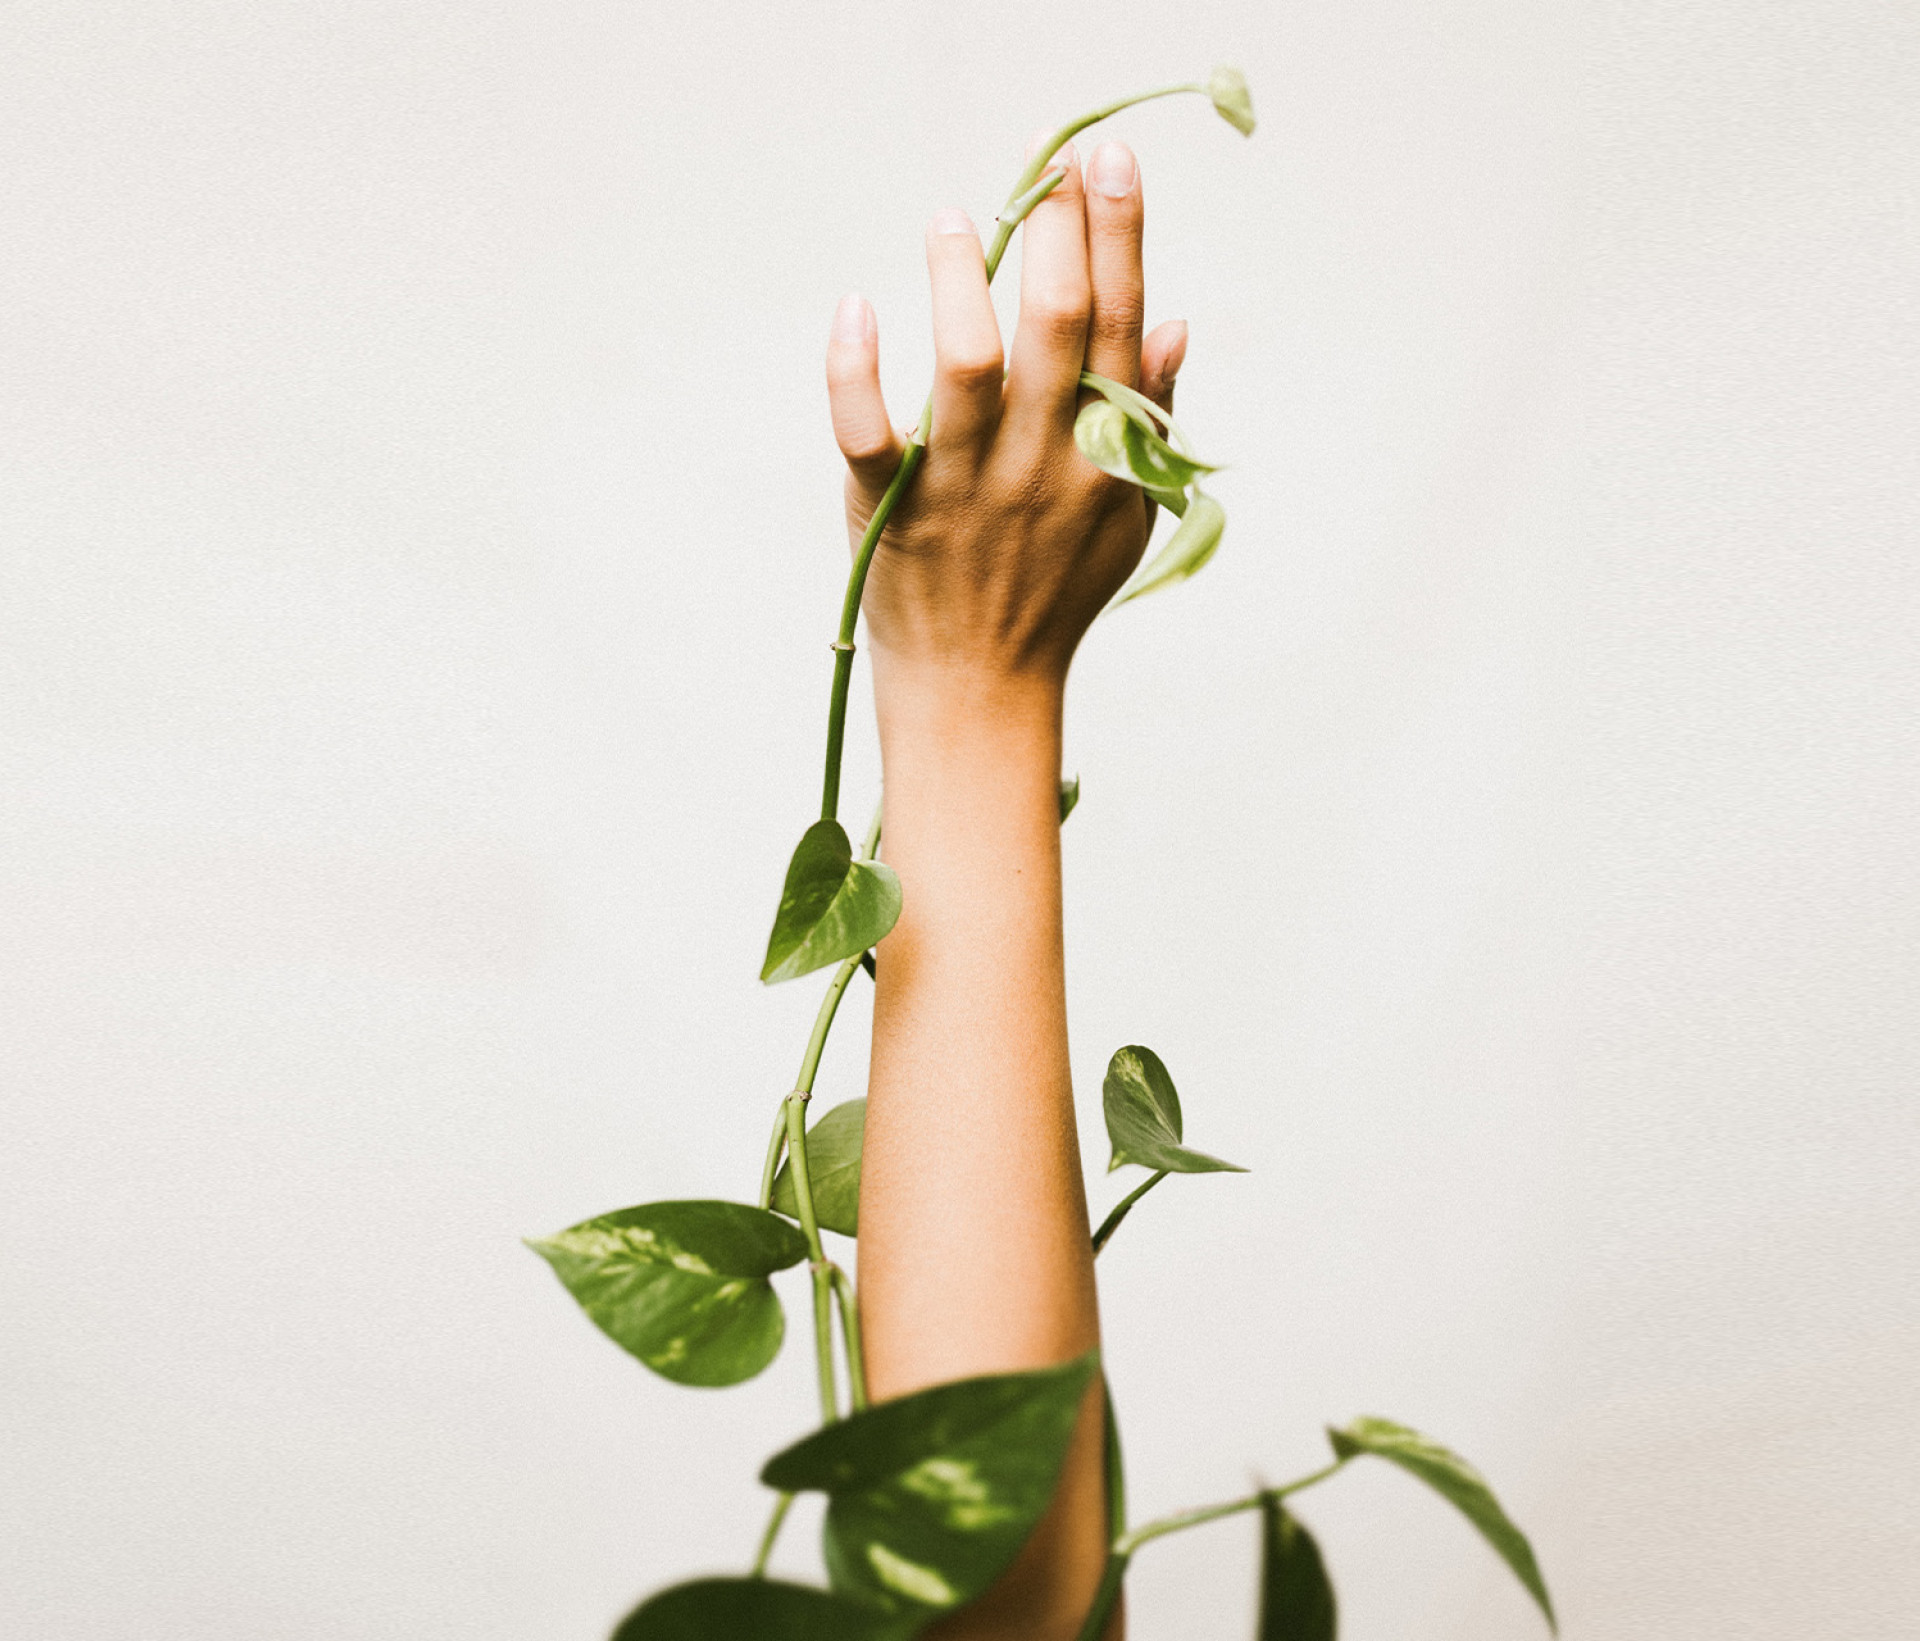 A raised hand covered with a plant